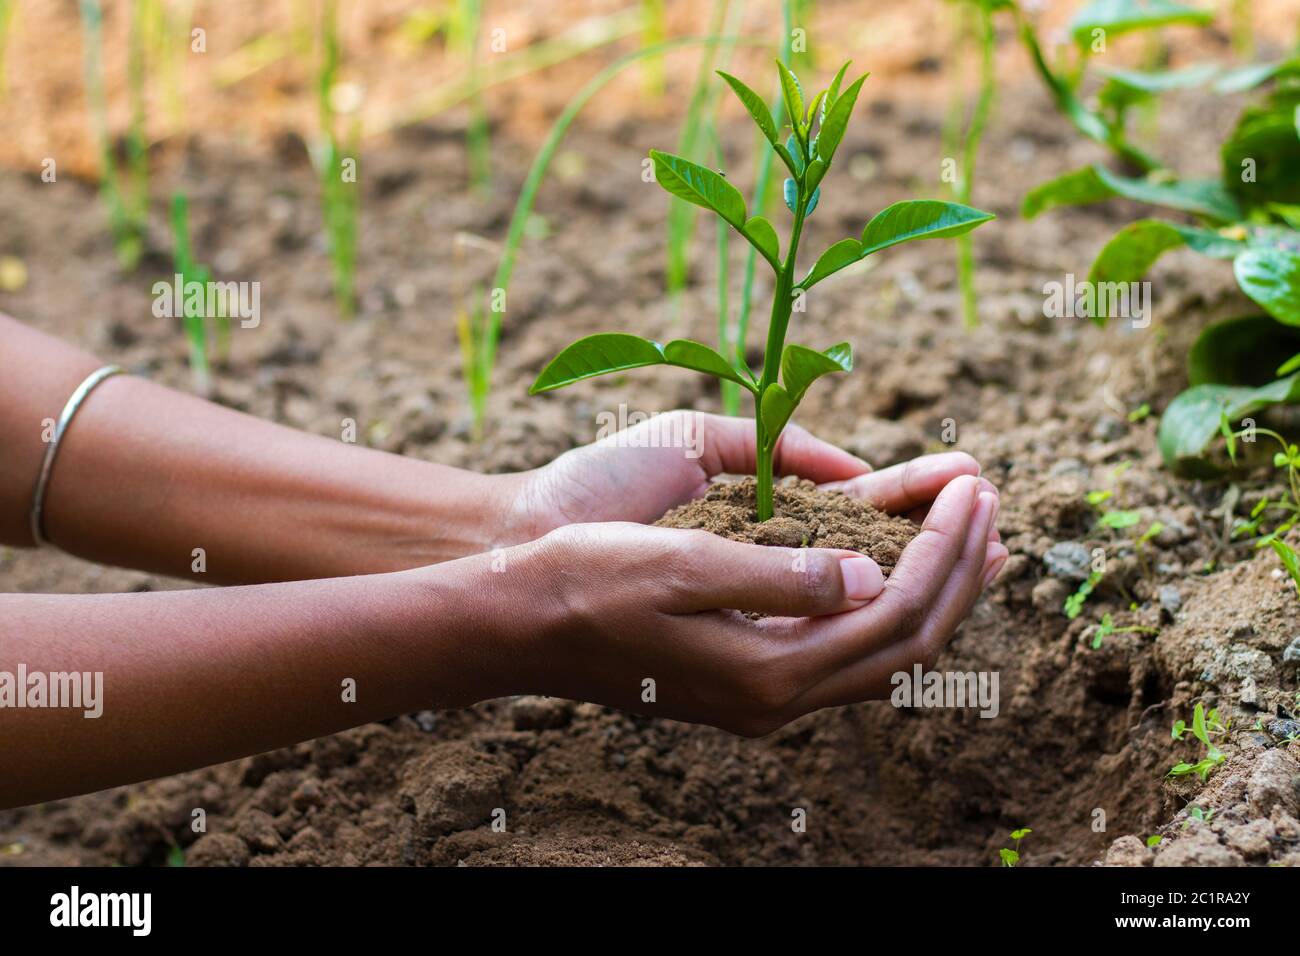 A woman putting Plant on the soil Stock Photo